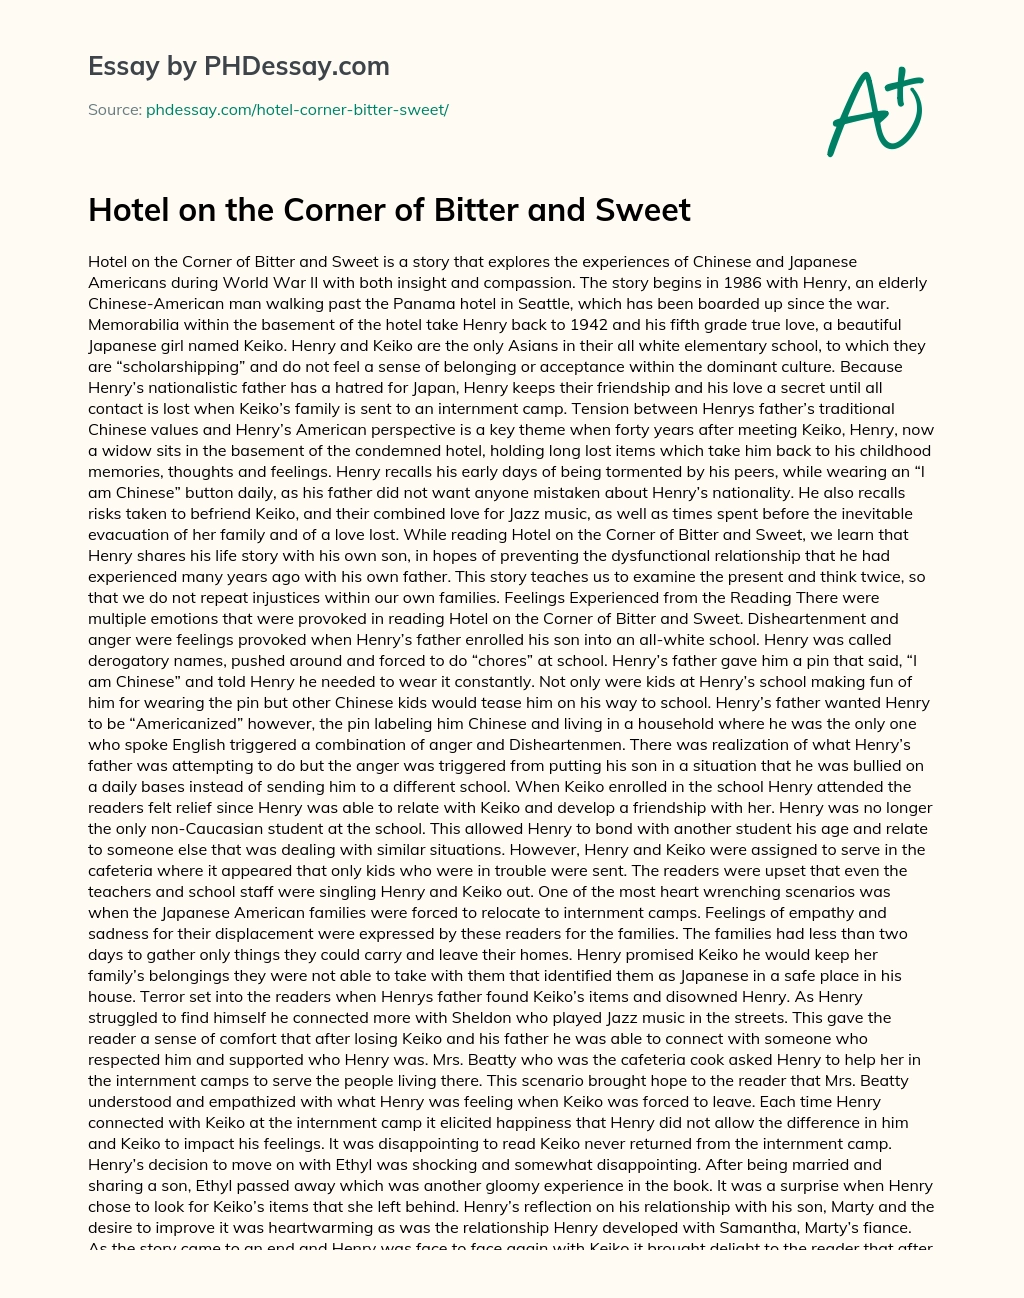 Hotel on the Corner of Bitter and Sweet essay